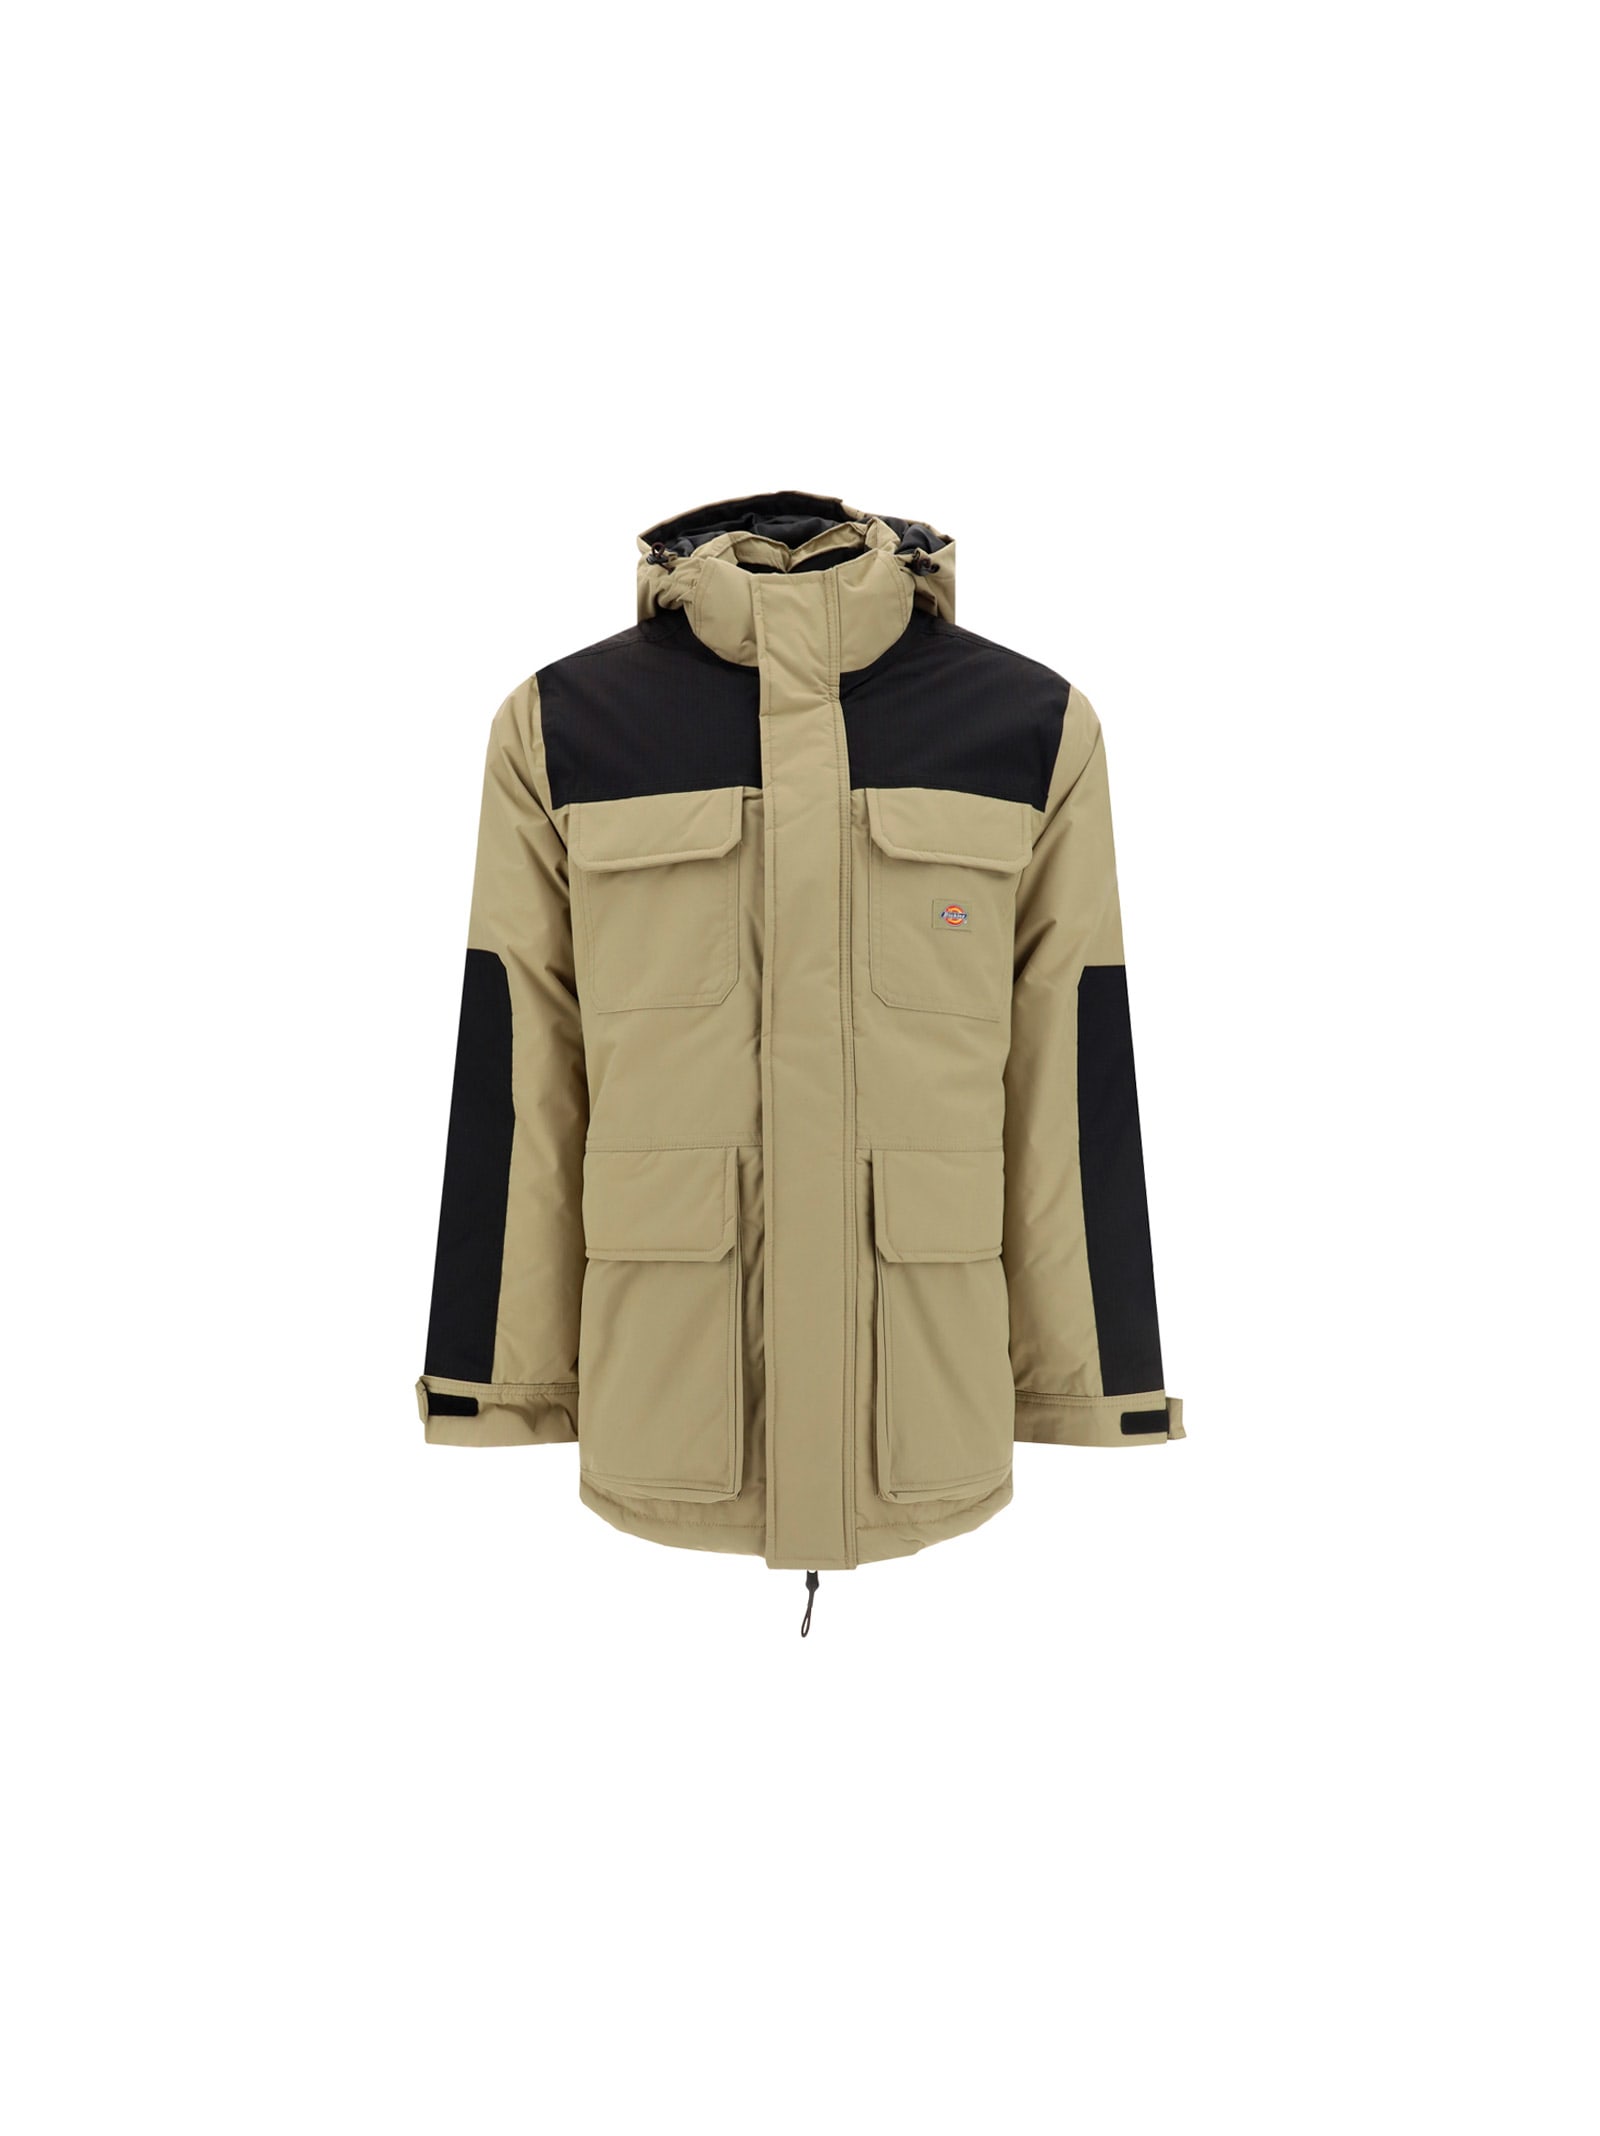 Dickies Glacier View Expedition Jacket